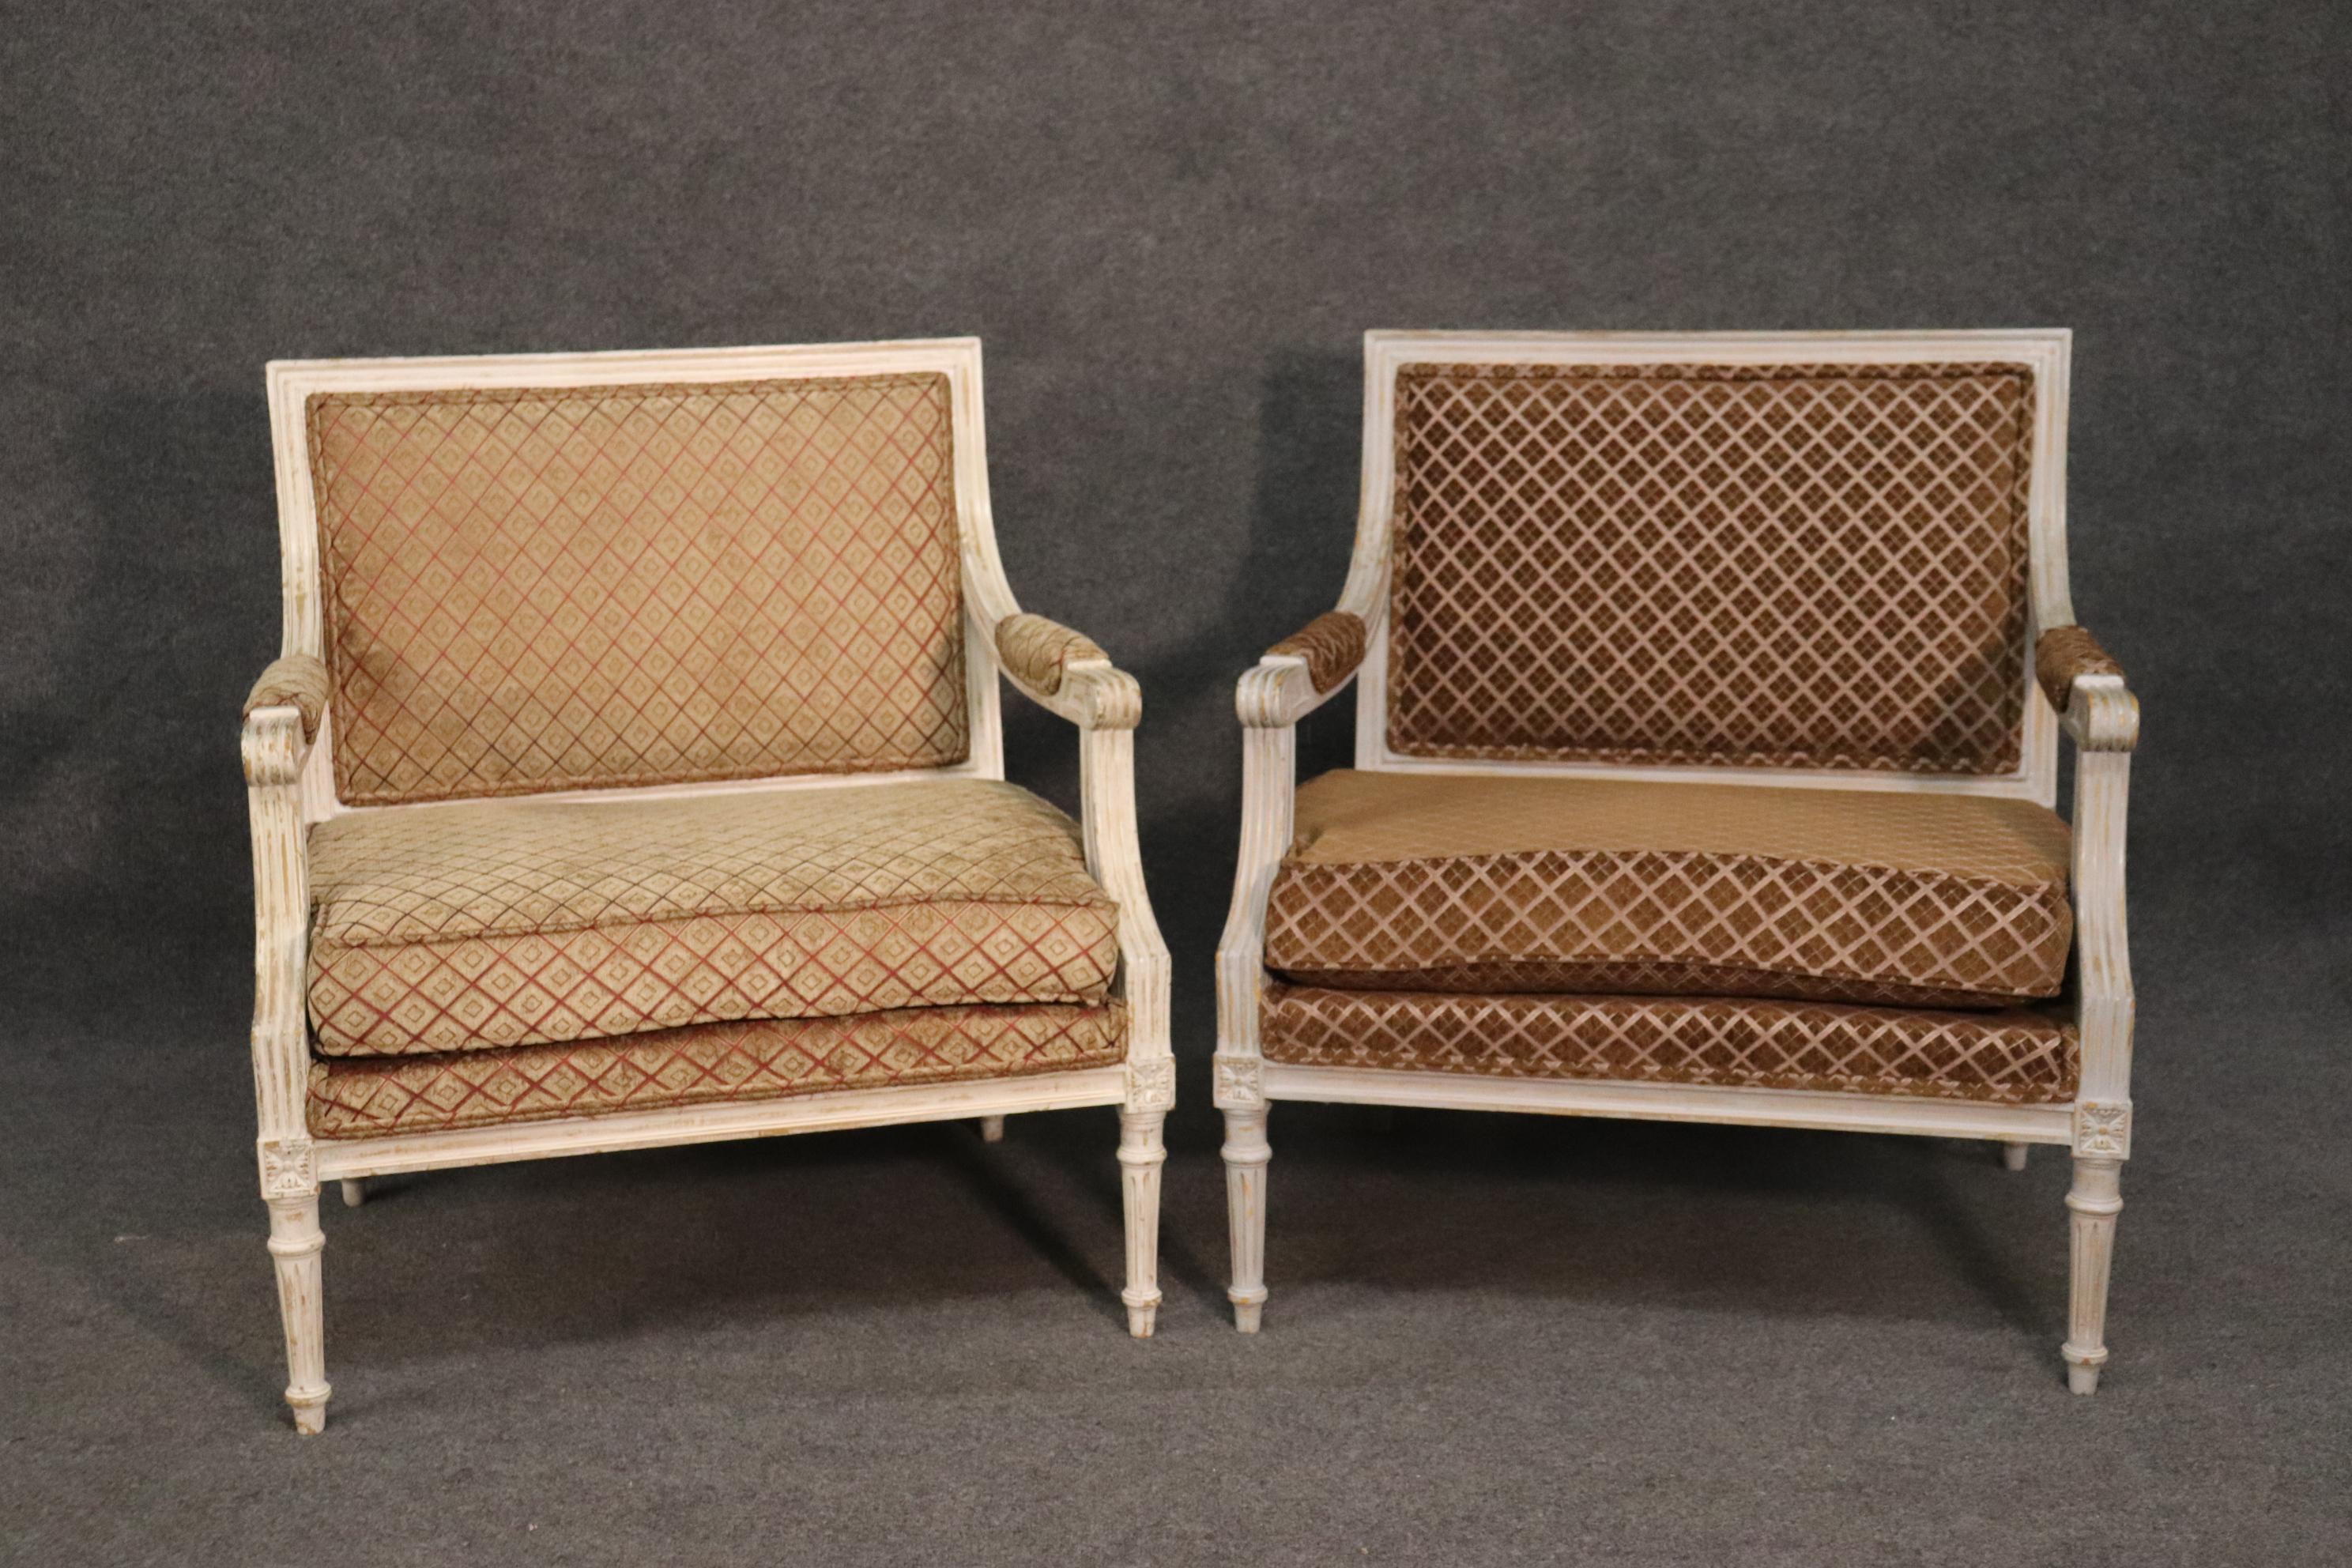 These beautiful distressed finish settee-like chairs are in very good condition and have beautiful upholstery.  One chair has a slightly different upholstery than the other and slightly lighter color frame too. The chairs measure 35 inches tall x